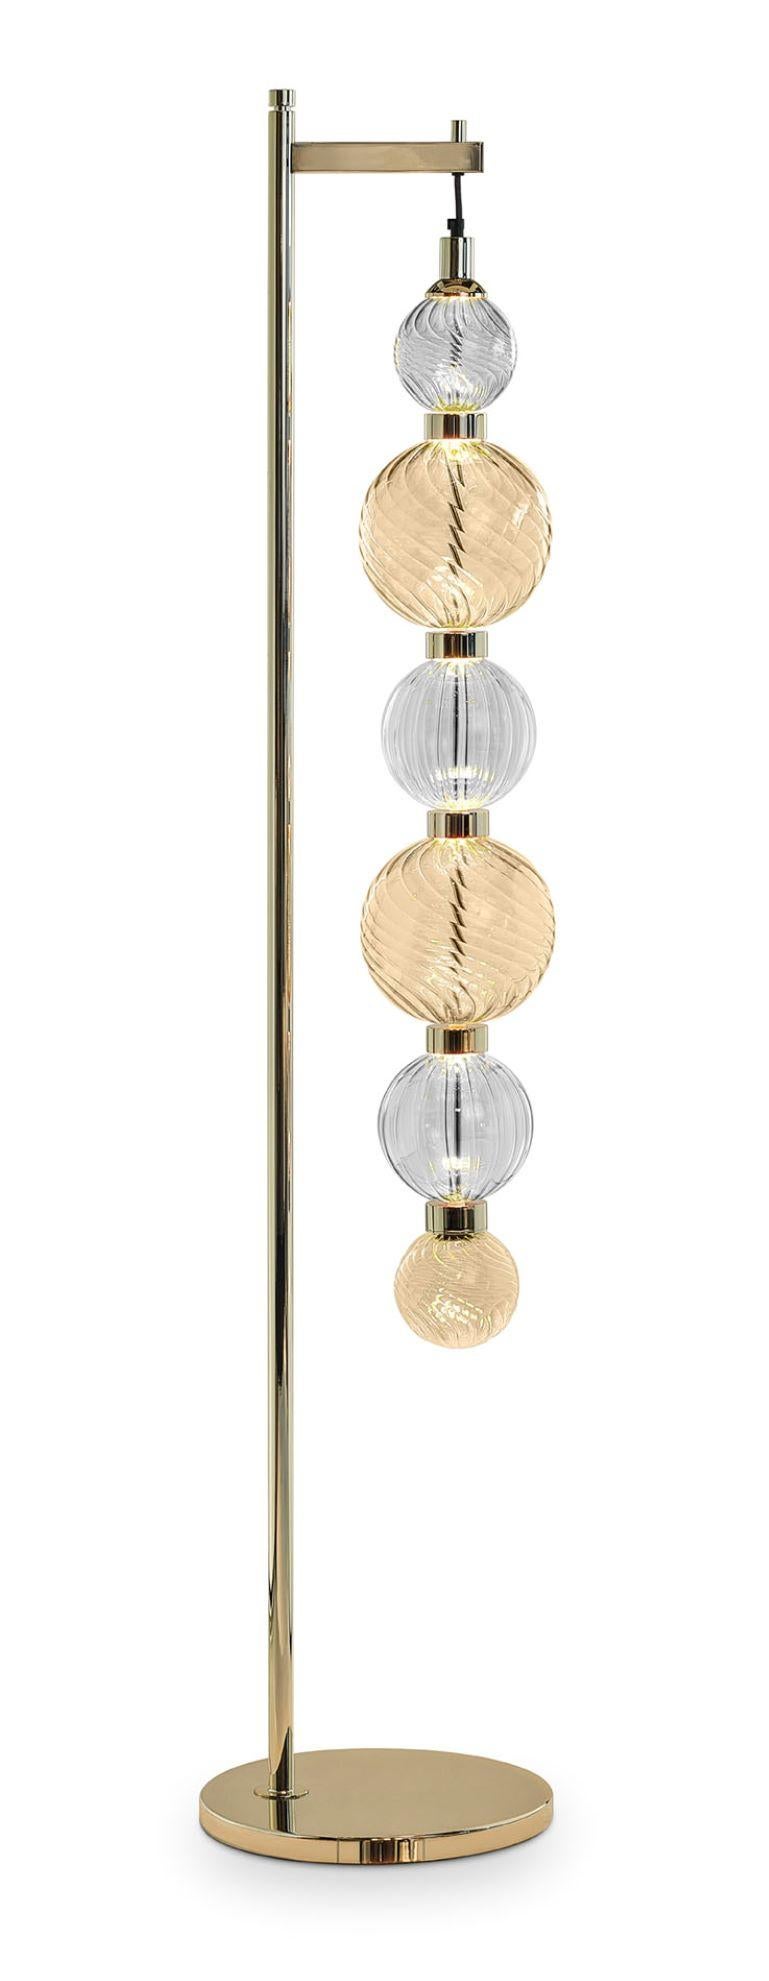 Italian Floor Lamp Polished Champagne or Chrome Finish Murano Glass Spheres Customizable For Sale